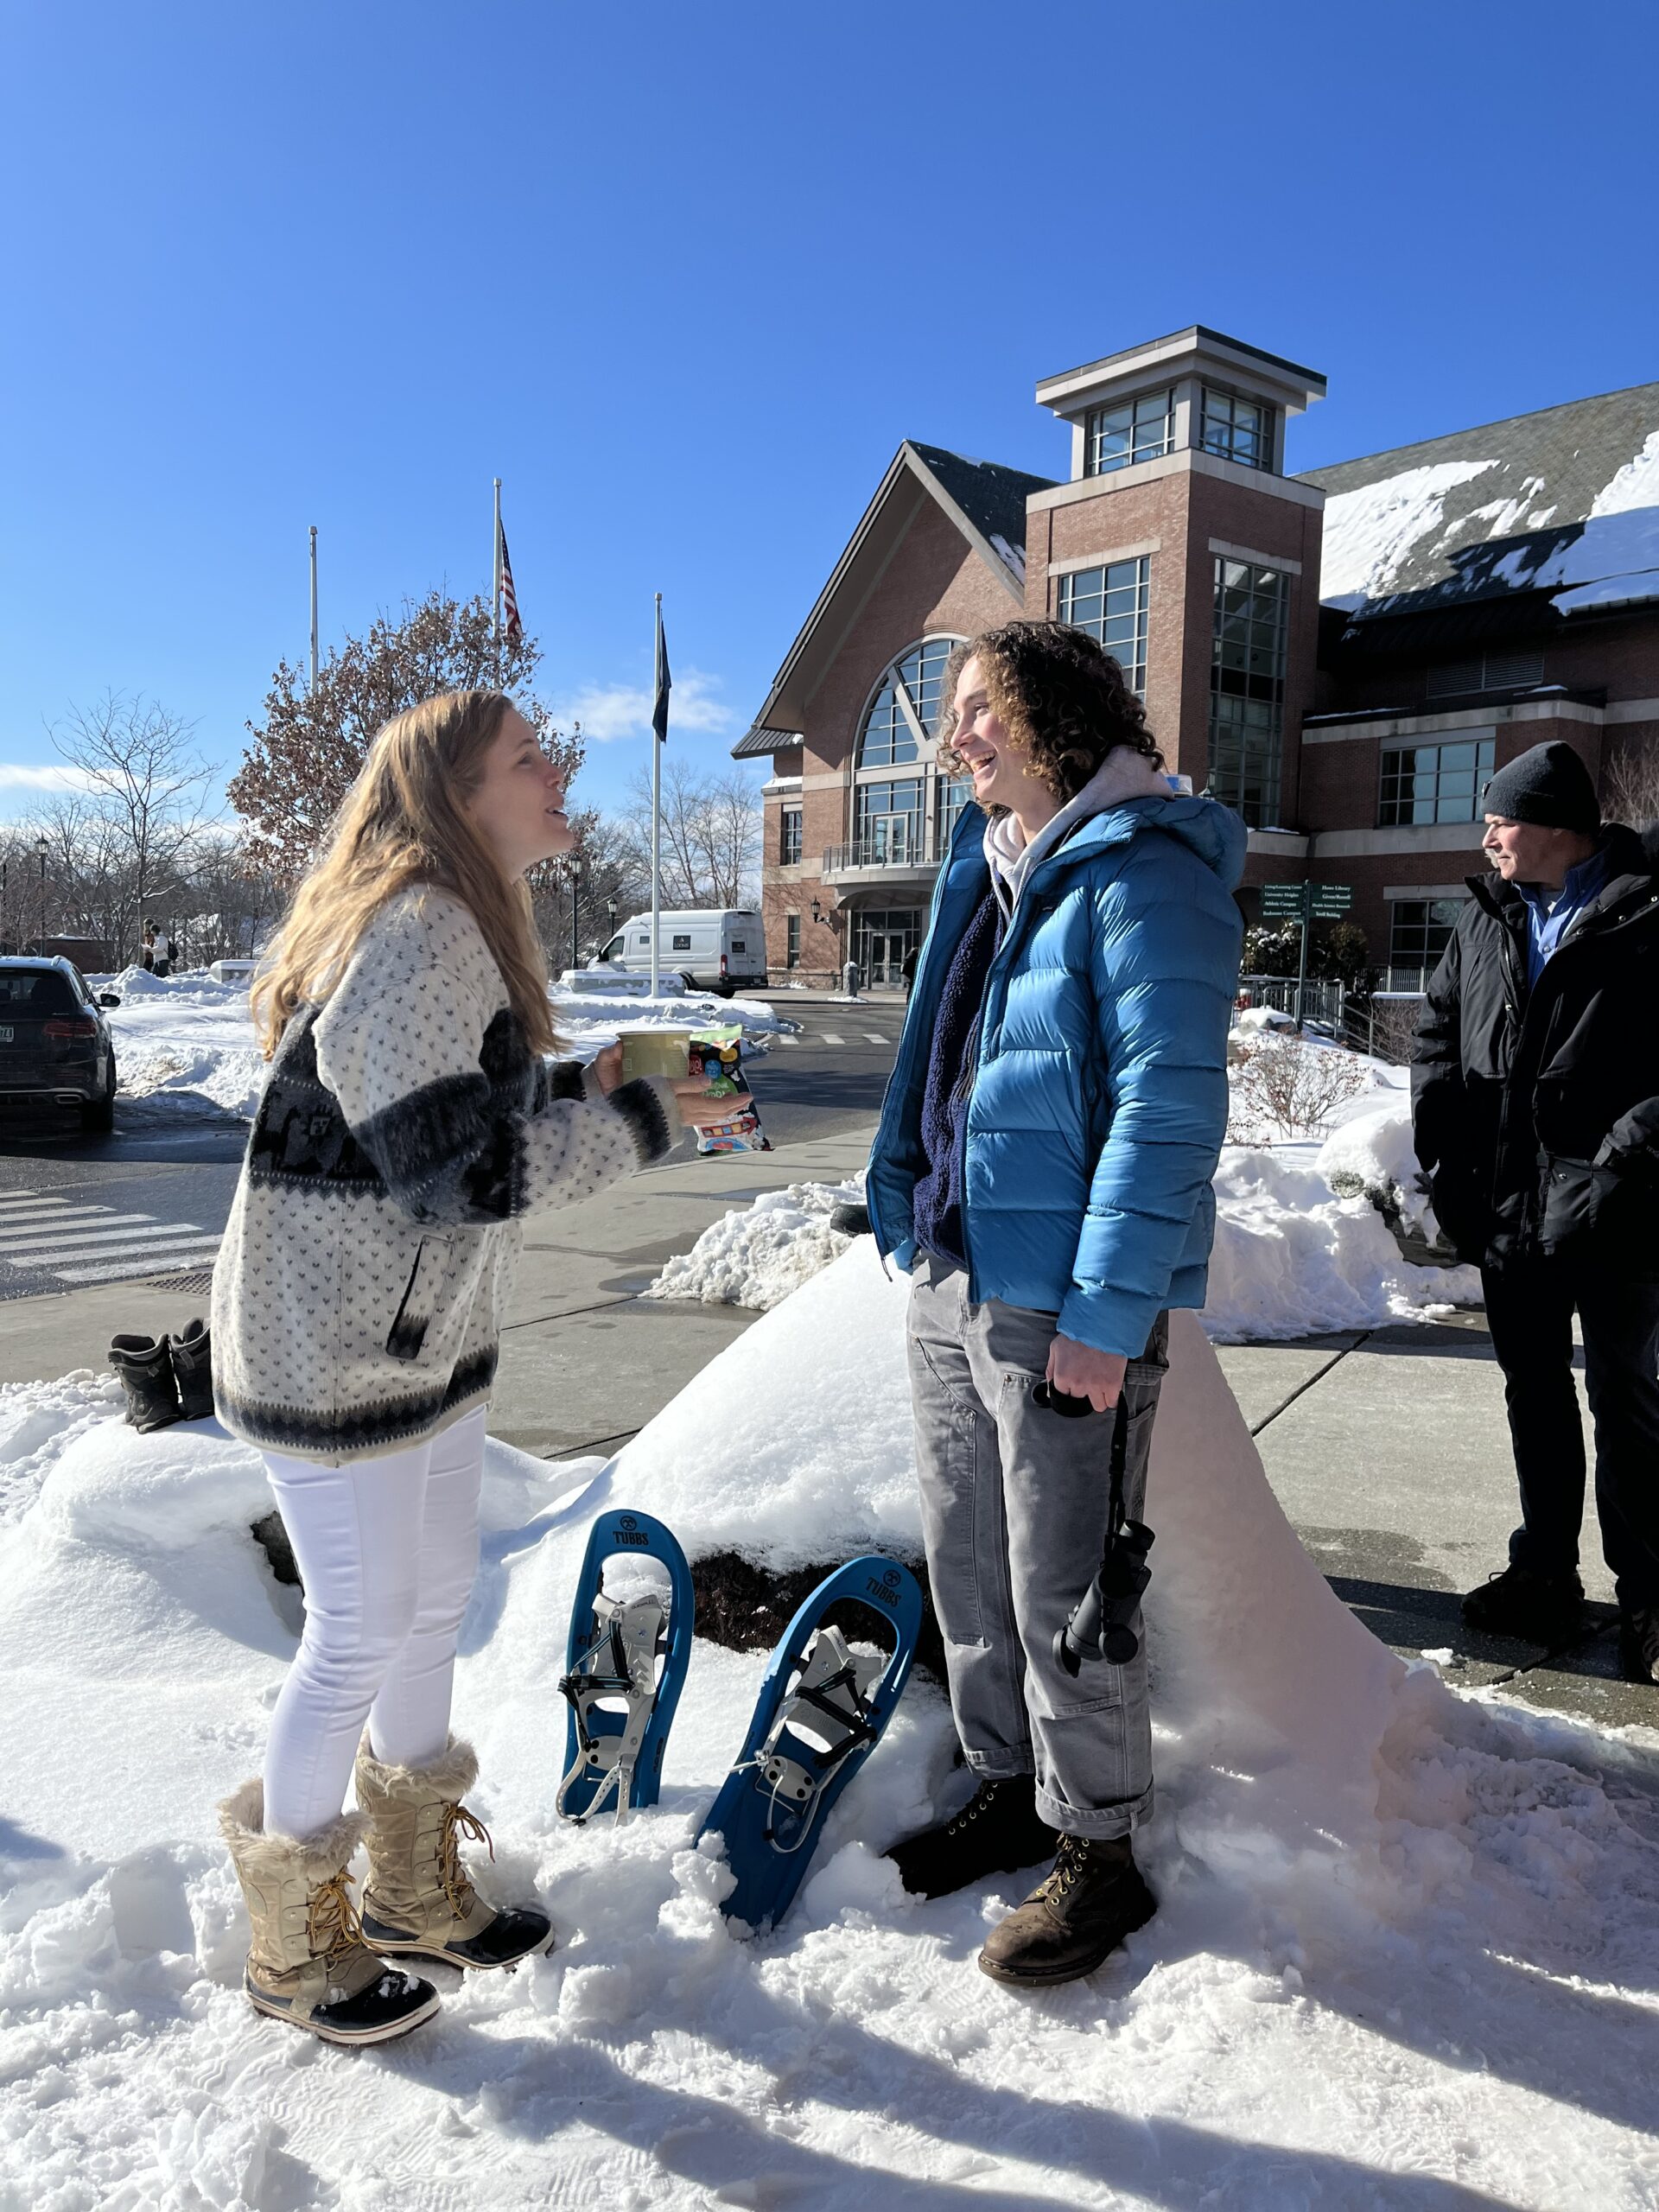 Two students talking while standing outside in snow boots.